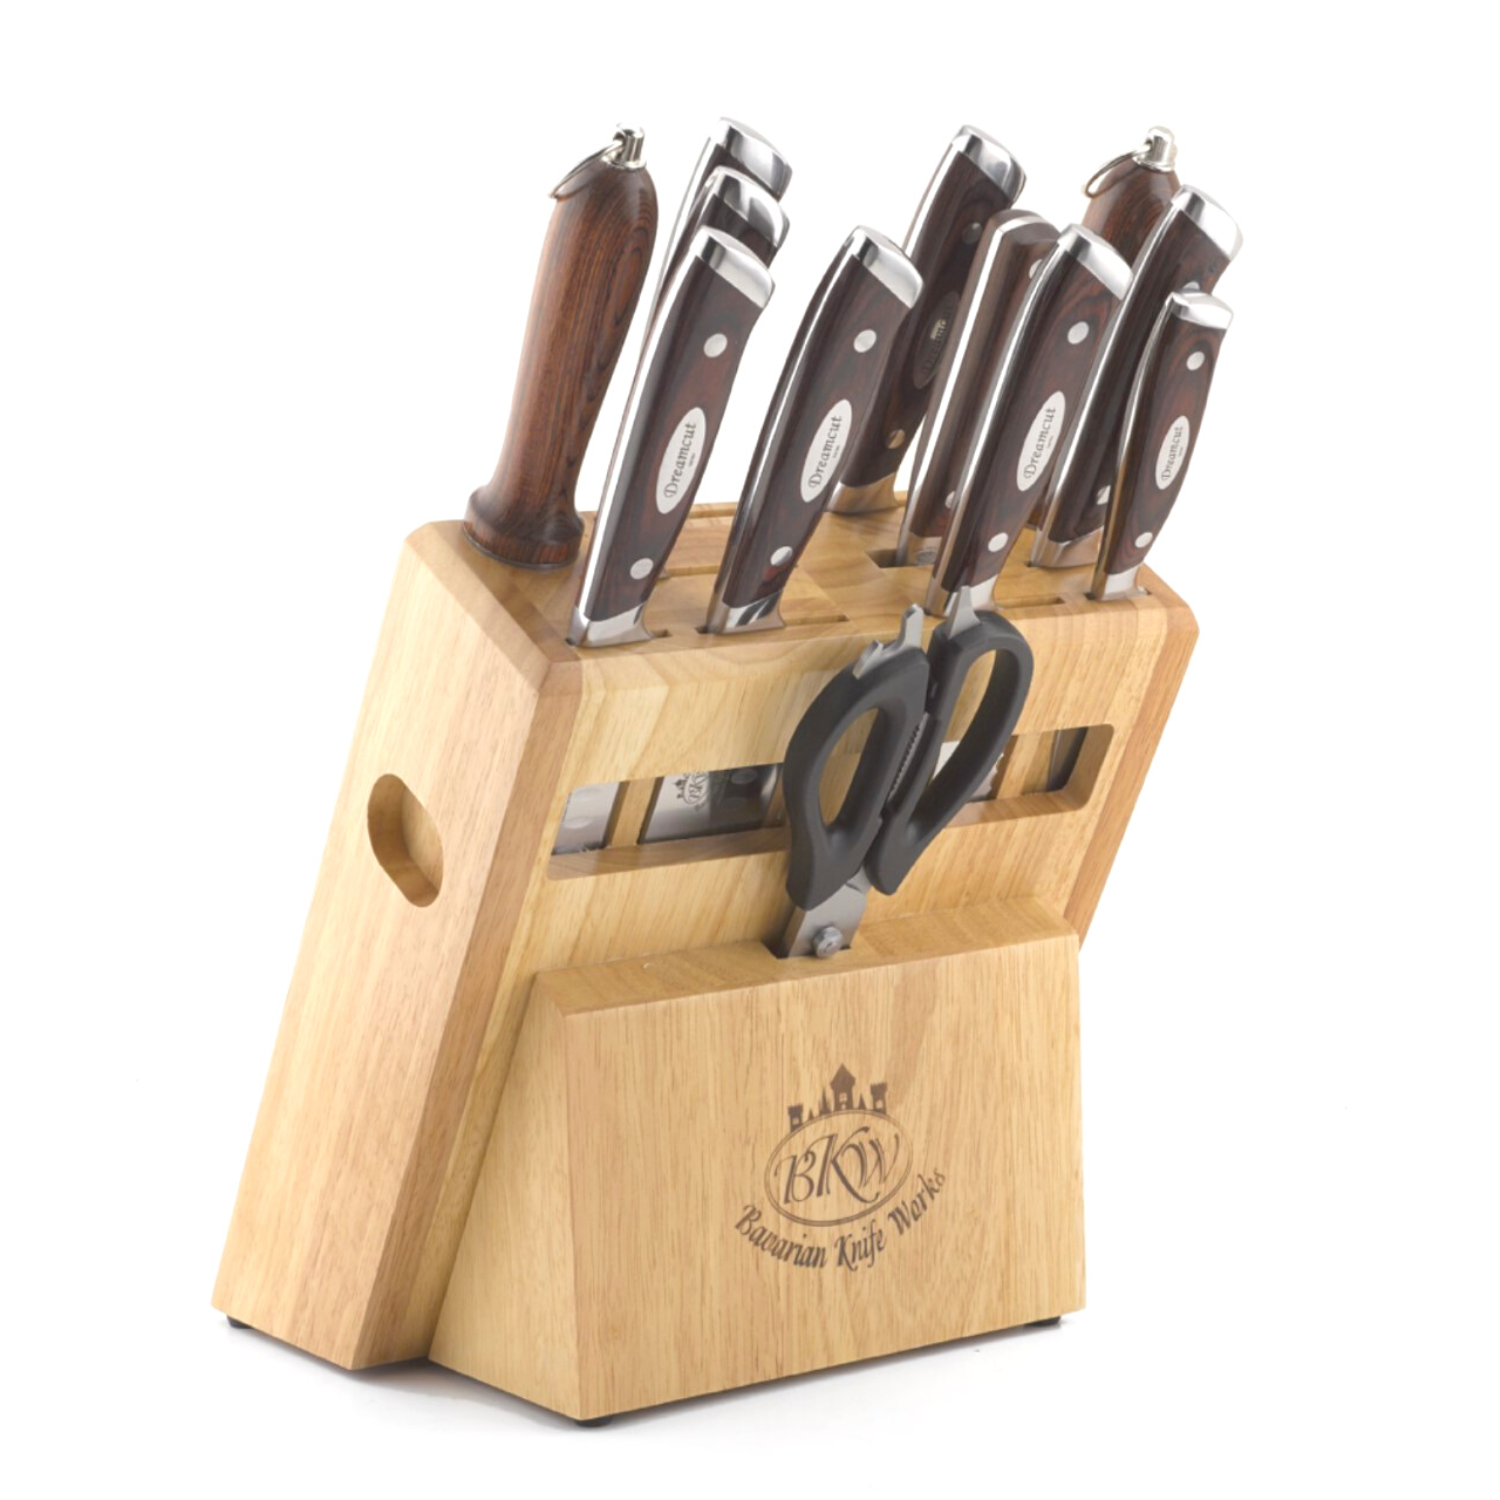 12 pc set Sale -  The Dreamcut Series - order today and get free 8 inch chef knife